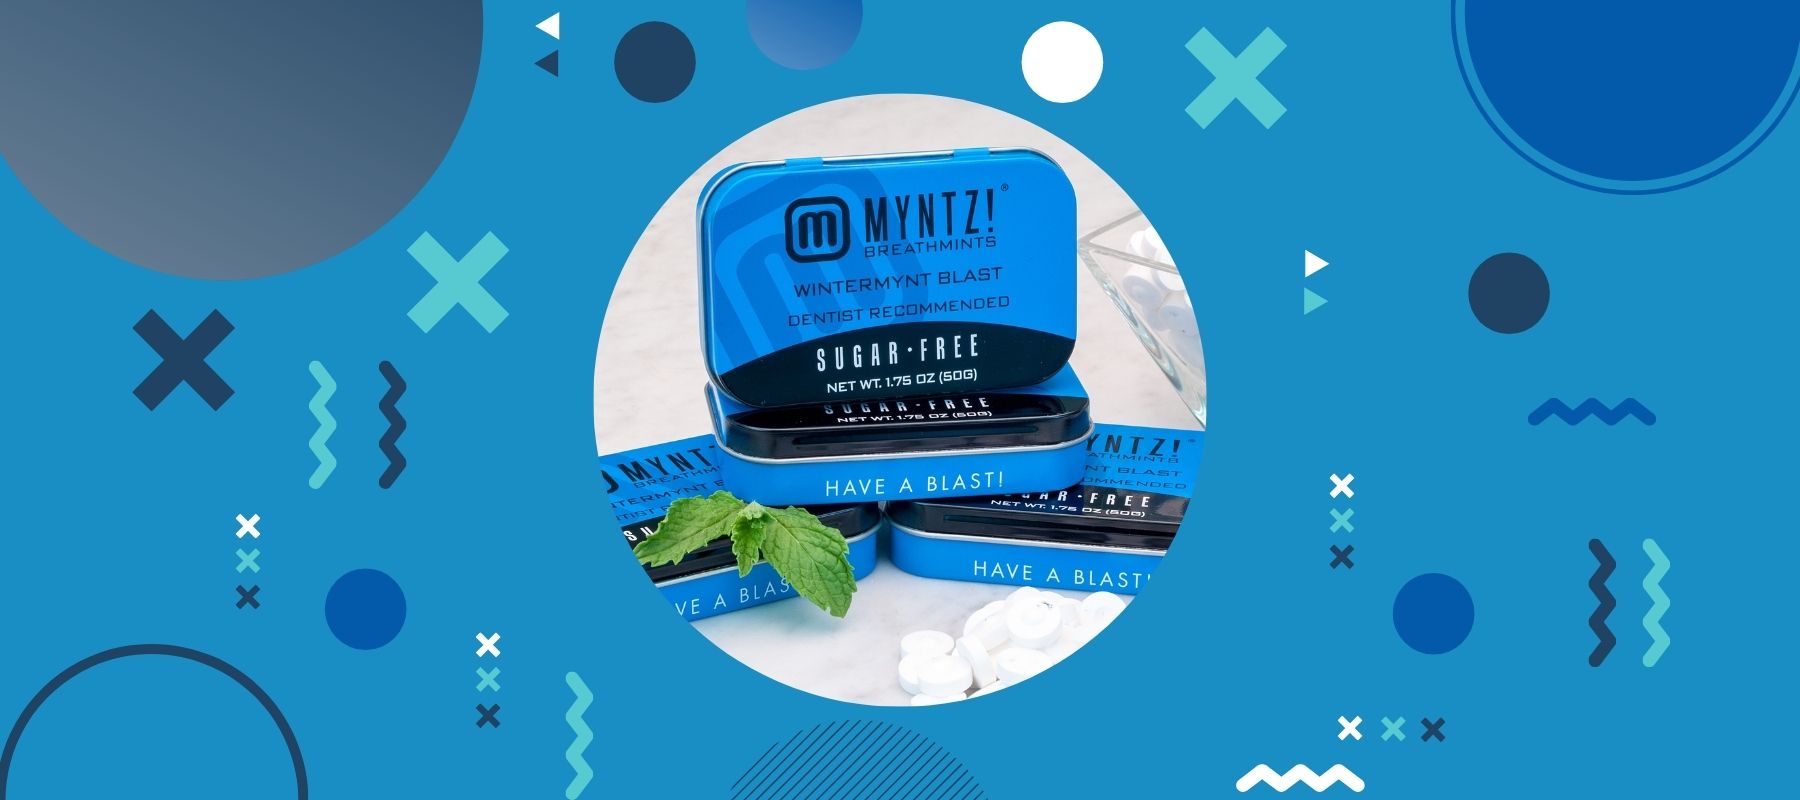 Five Reasons to Keep Myntz! On Hand to Freshen Breath and to Enjoy